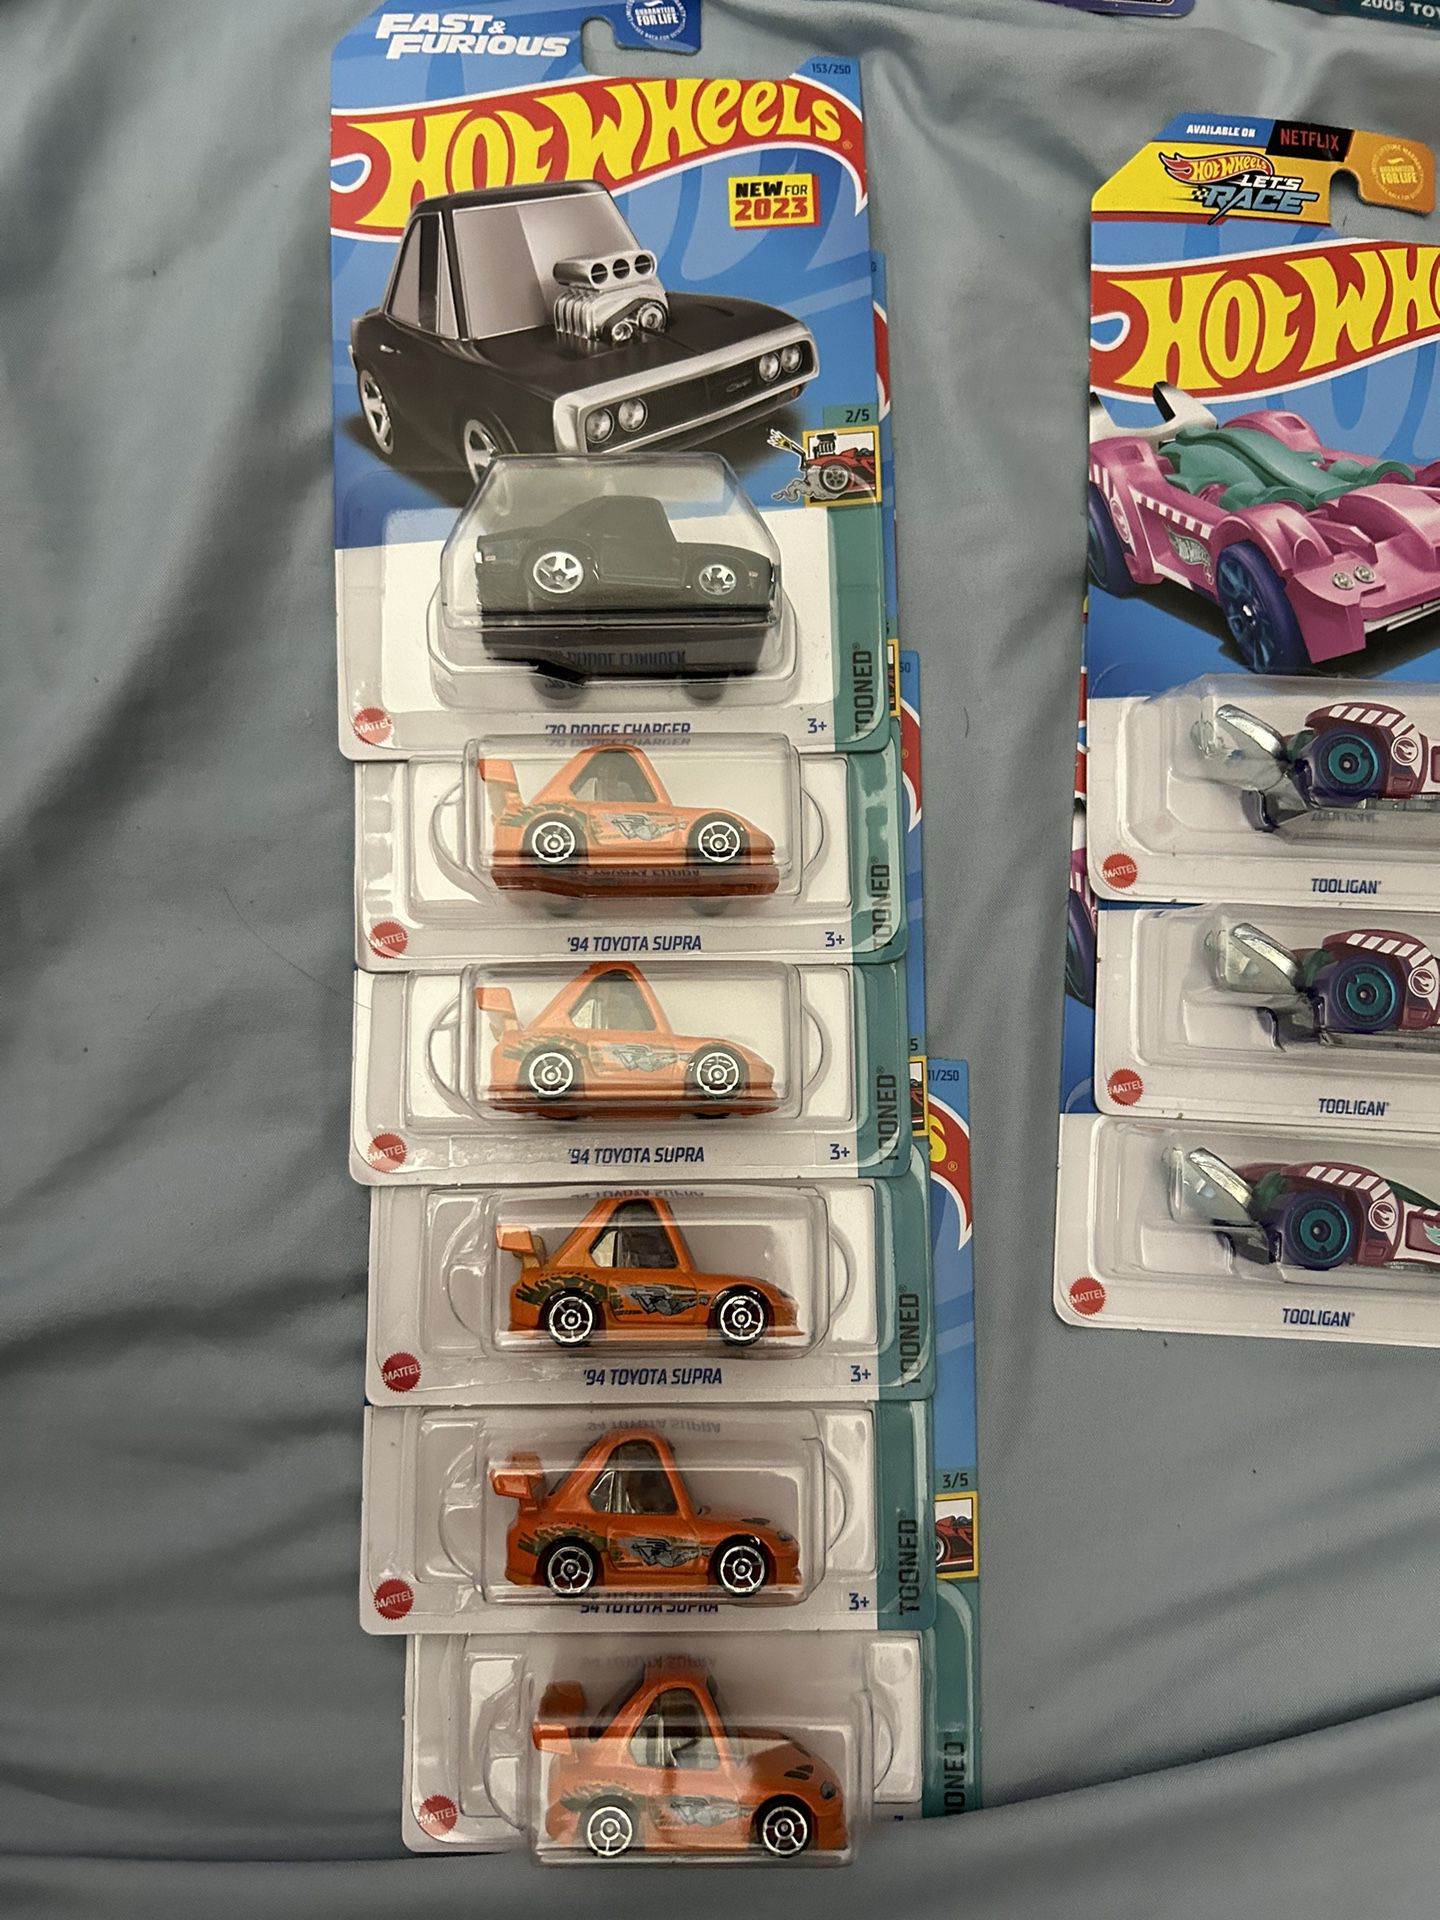 Hotwheels Tooned F&F Charger and Supra